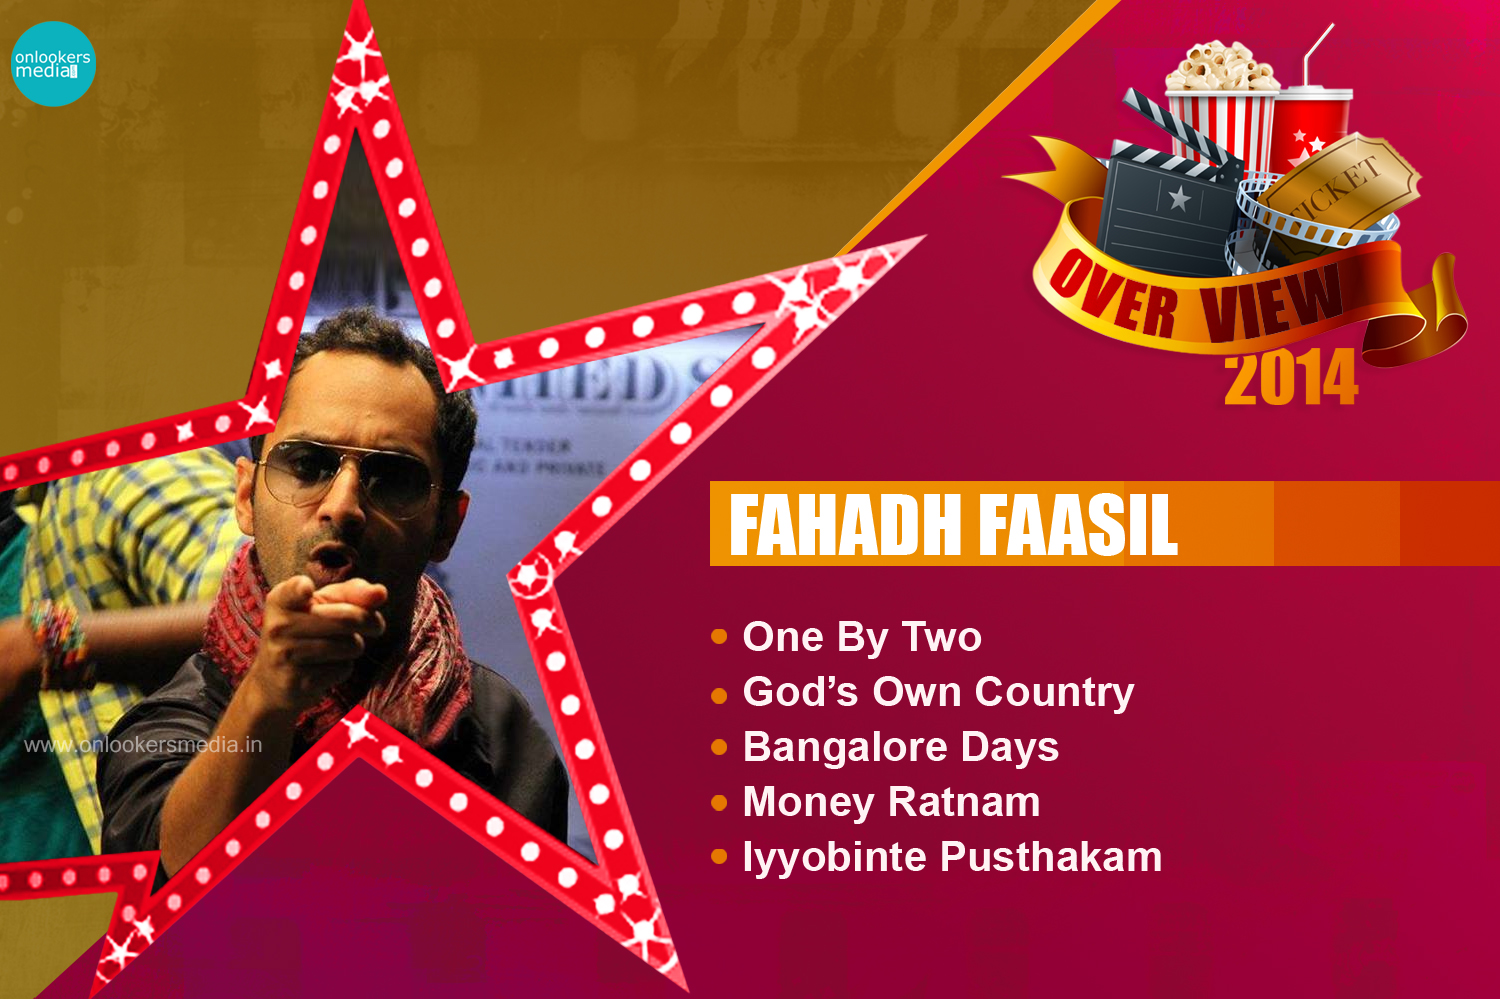 Fahadh Faail 2014 Overview-Report-Hit Flop Movie List-One By Two-Onlookers Media